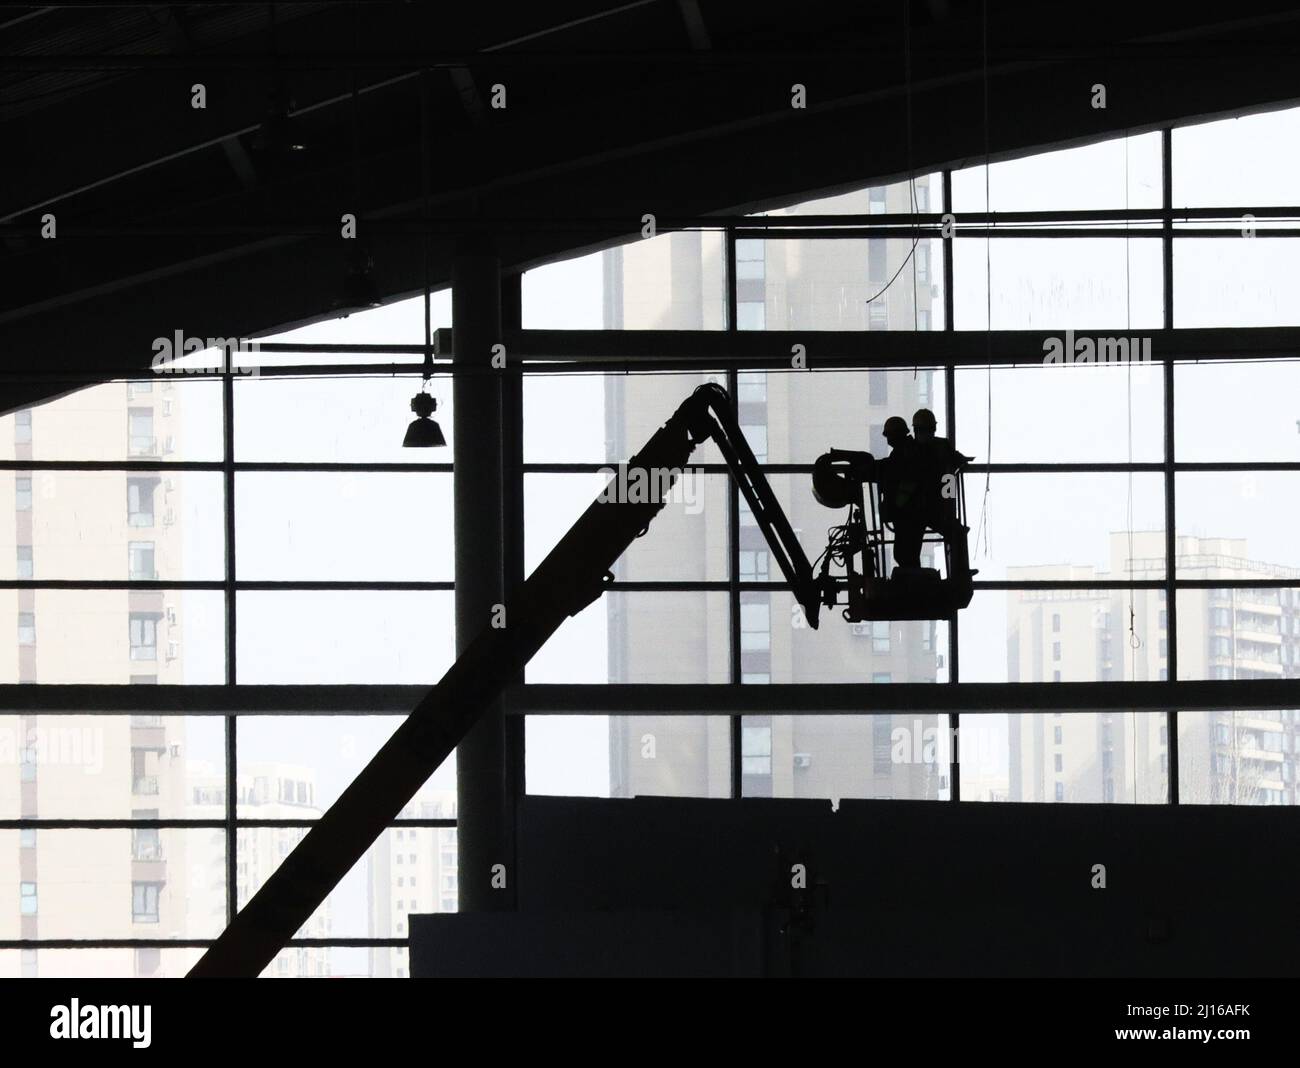 Shenyang, March 22. 20th Mar, 2022. Staff members work at the construction site of the temporary hospital at Shenyang International Exhibition Center in Shenyang, northeast China's Liaoning Province, March 22, 2022. The temporary hospital and health station at Shenyang International Exhibition Center started construction on March 20, 2022. Credit: Yang Qing/Xinhua/Alamy Live News Stock Photo